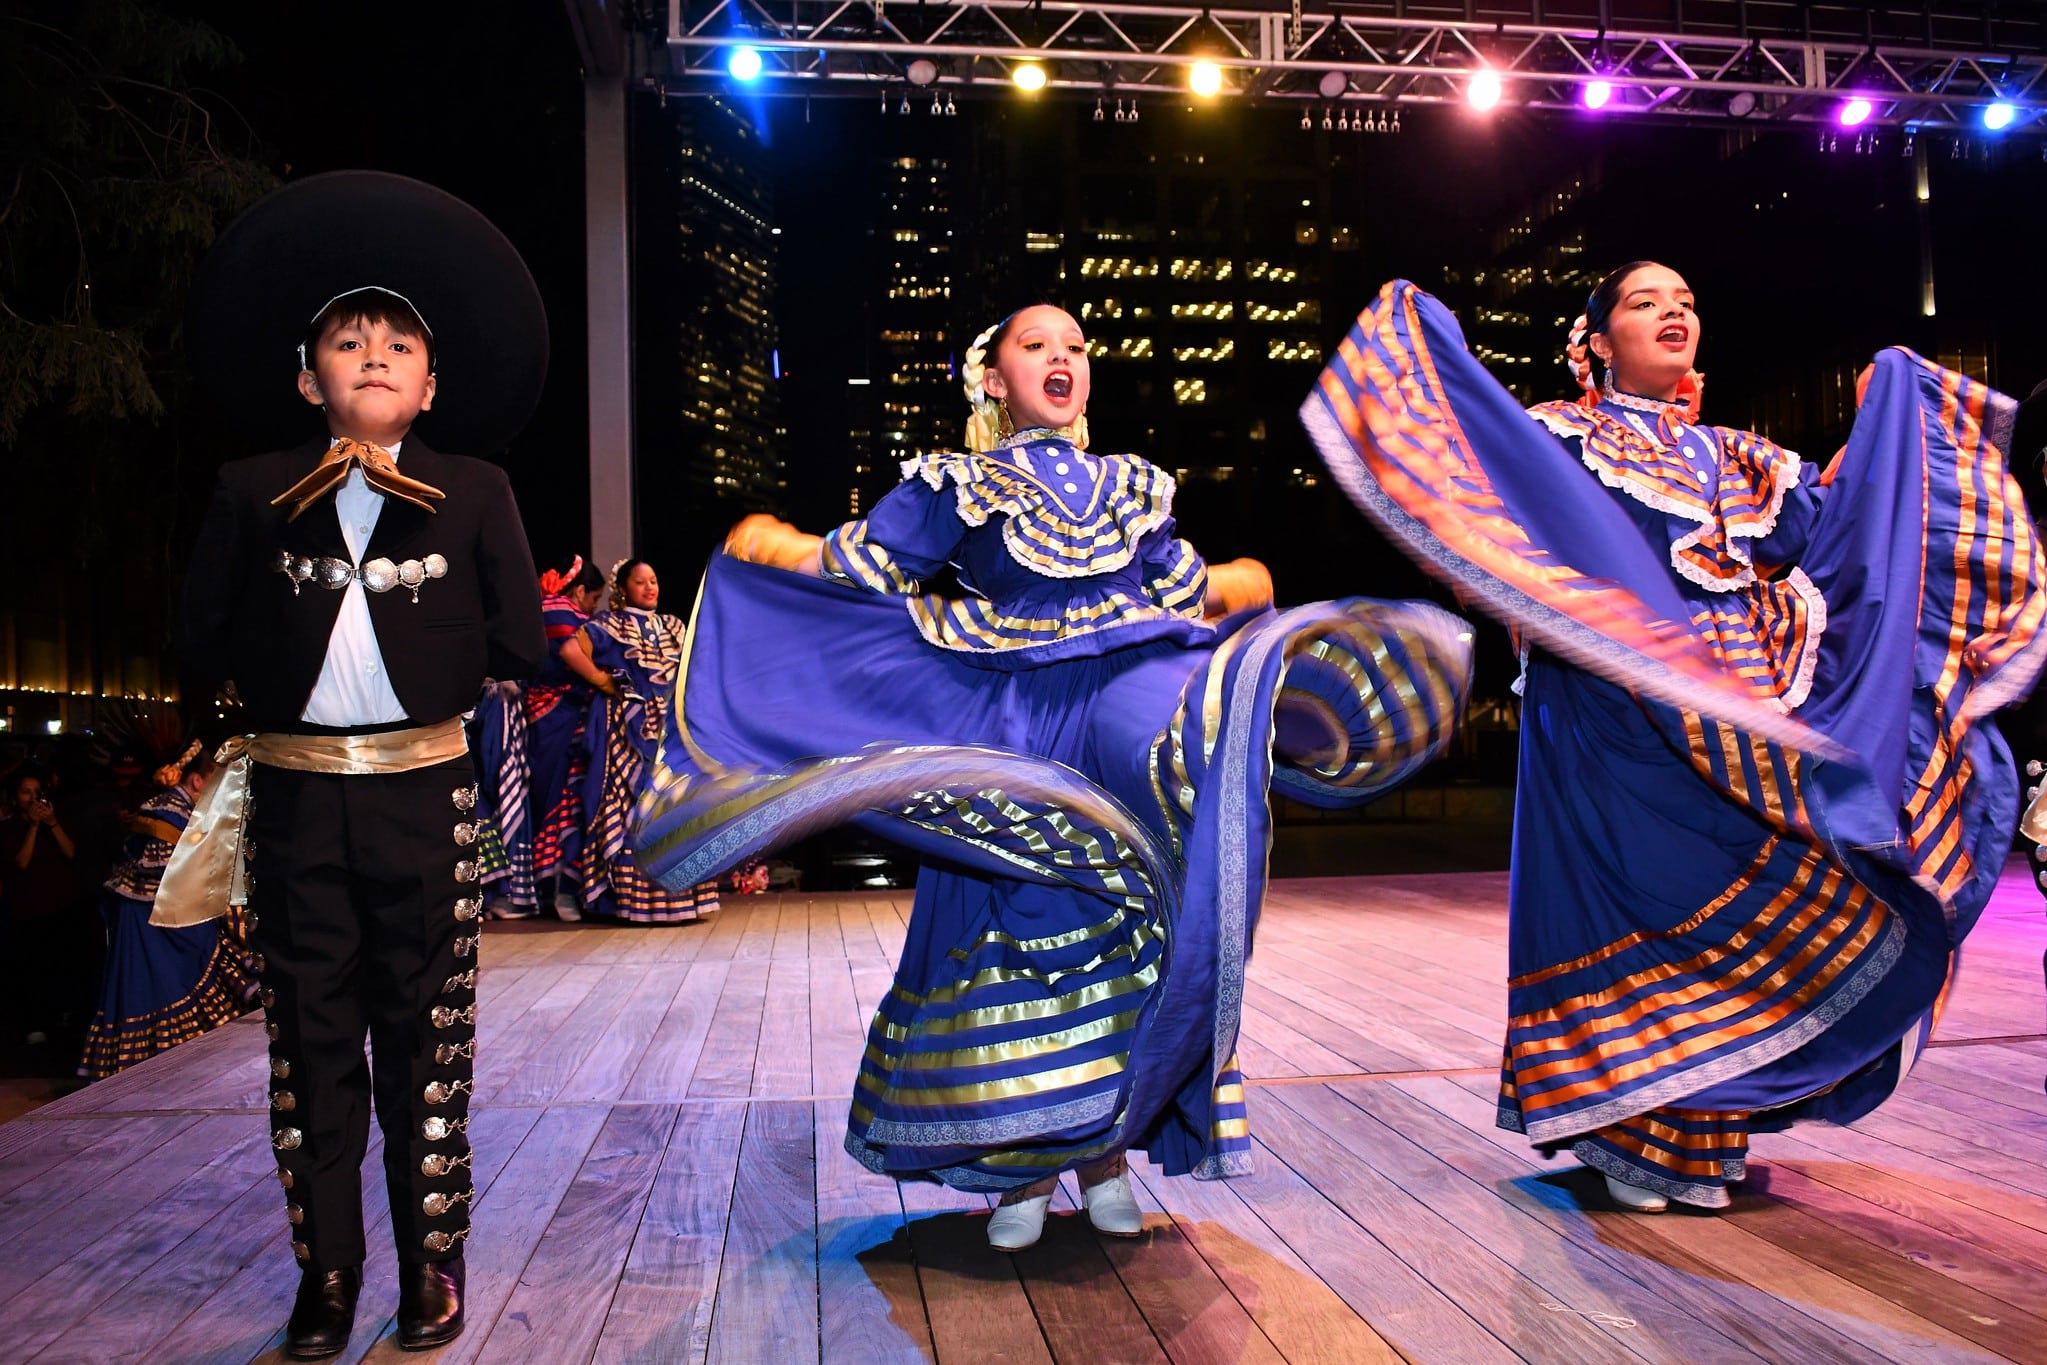 Nueva Luna performs at Discovery Green in downtown Houston